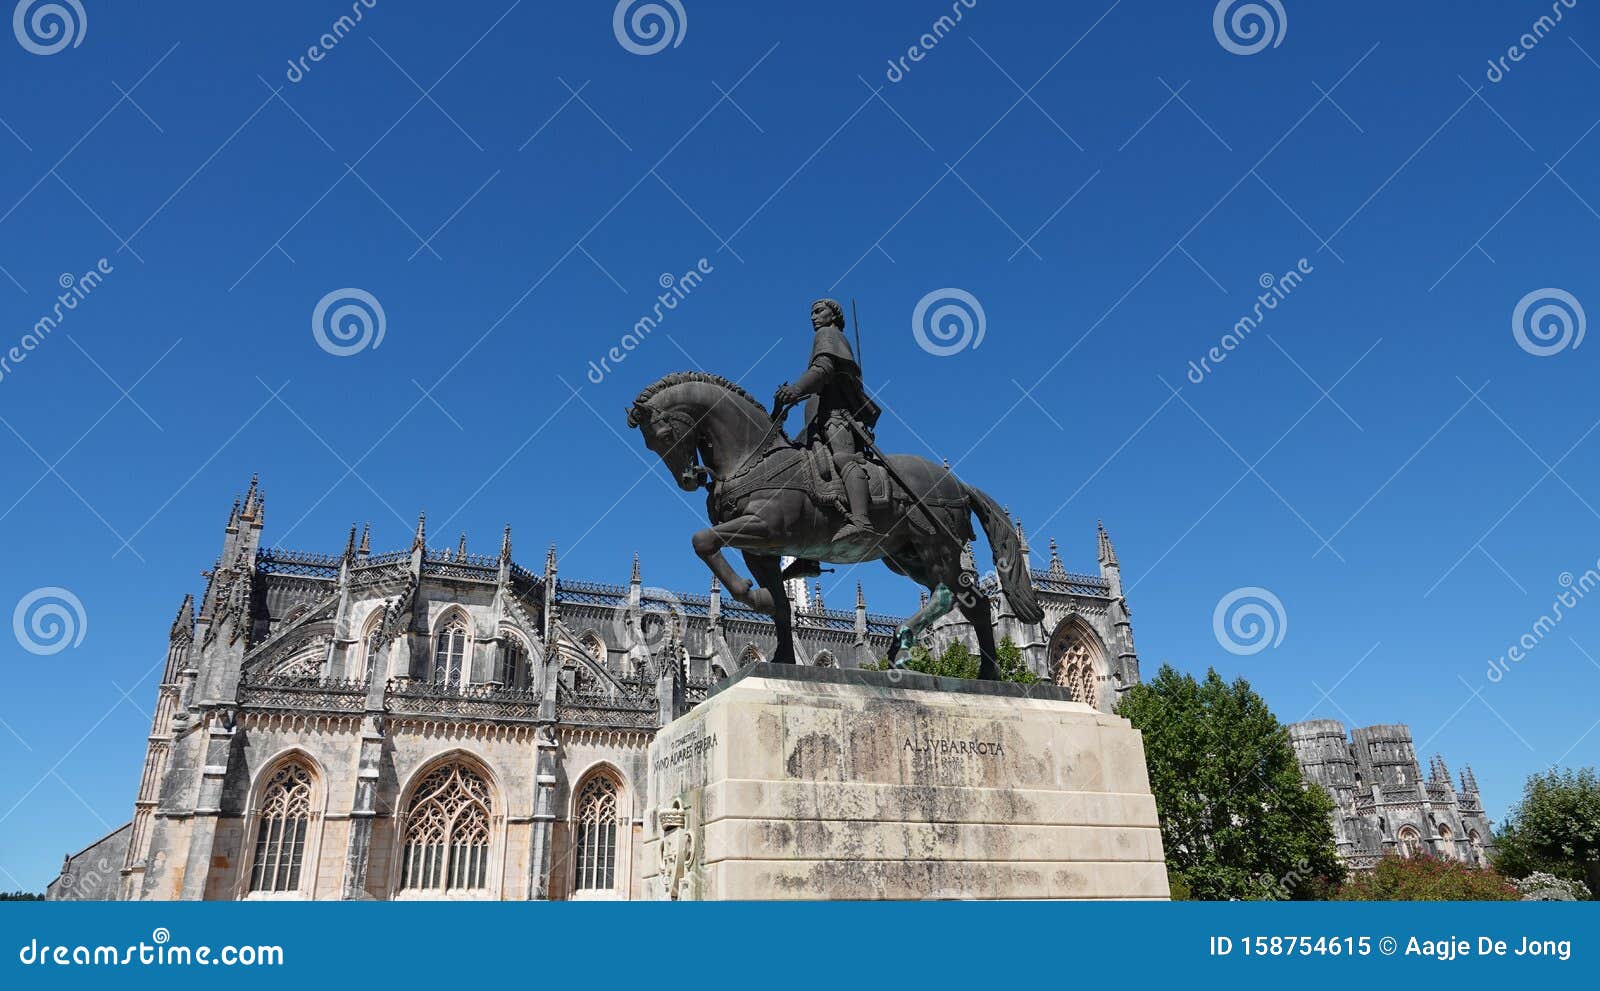 monastery of batalha with statue of general pereira in portugal